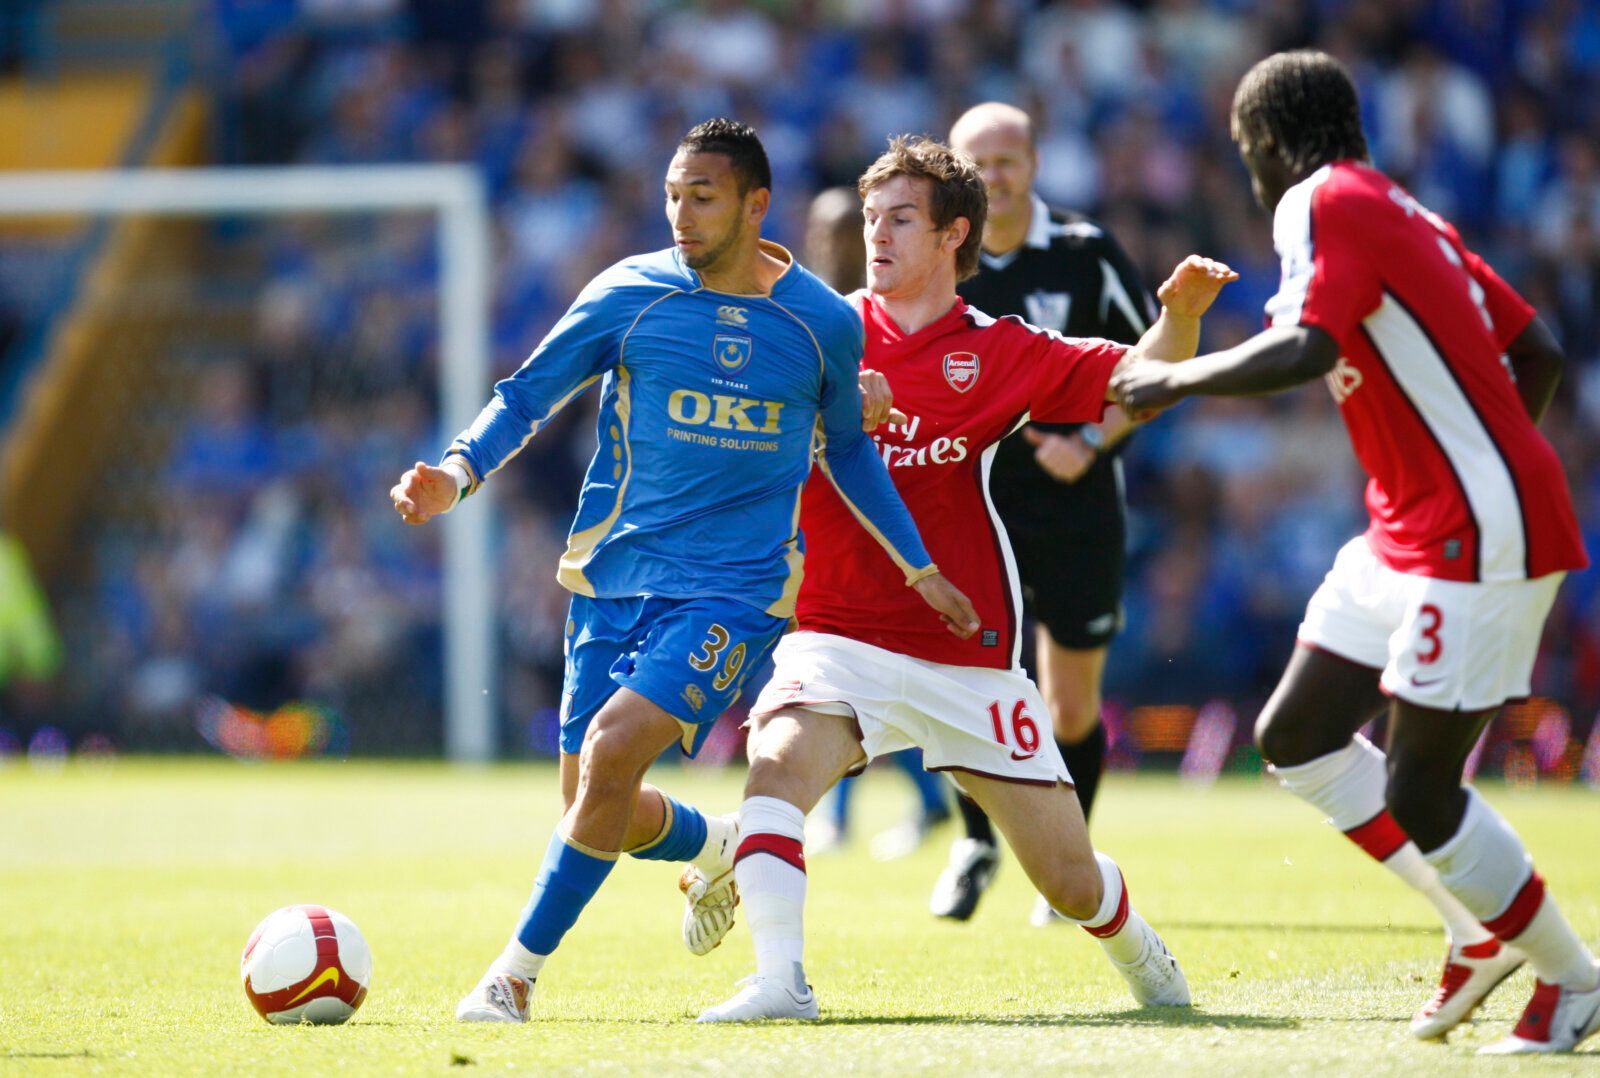 Football - Portsmouth v Arsenal Barclays Premier League  - Fratton Park - 2/5/09 
Aaron Ramsey of Arsenal &amp; Nadir Belhadj of Portsmouth 
Mandatory Credit: Action Images / Paul Harding 
Livepic 
NO ONLINE/INTERNET USE WITHOUT A LICENCE FROM THE FOOTBALL DATA CO LTD. FOR LICENCE ENQUIRIES PLEASE TELEPHONE +44 (0) 207 864 9000.